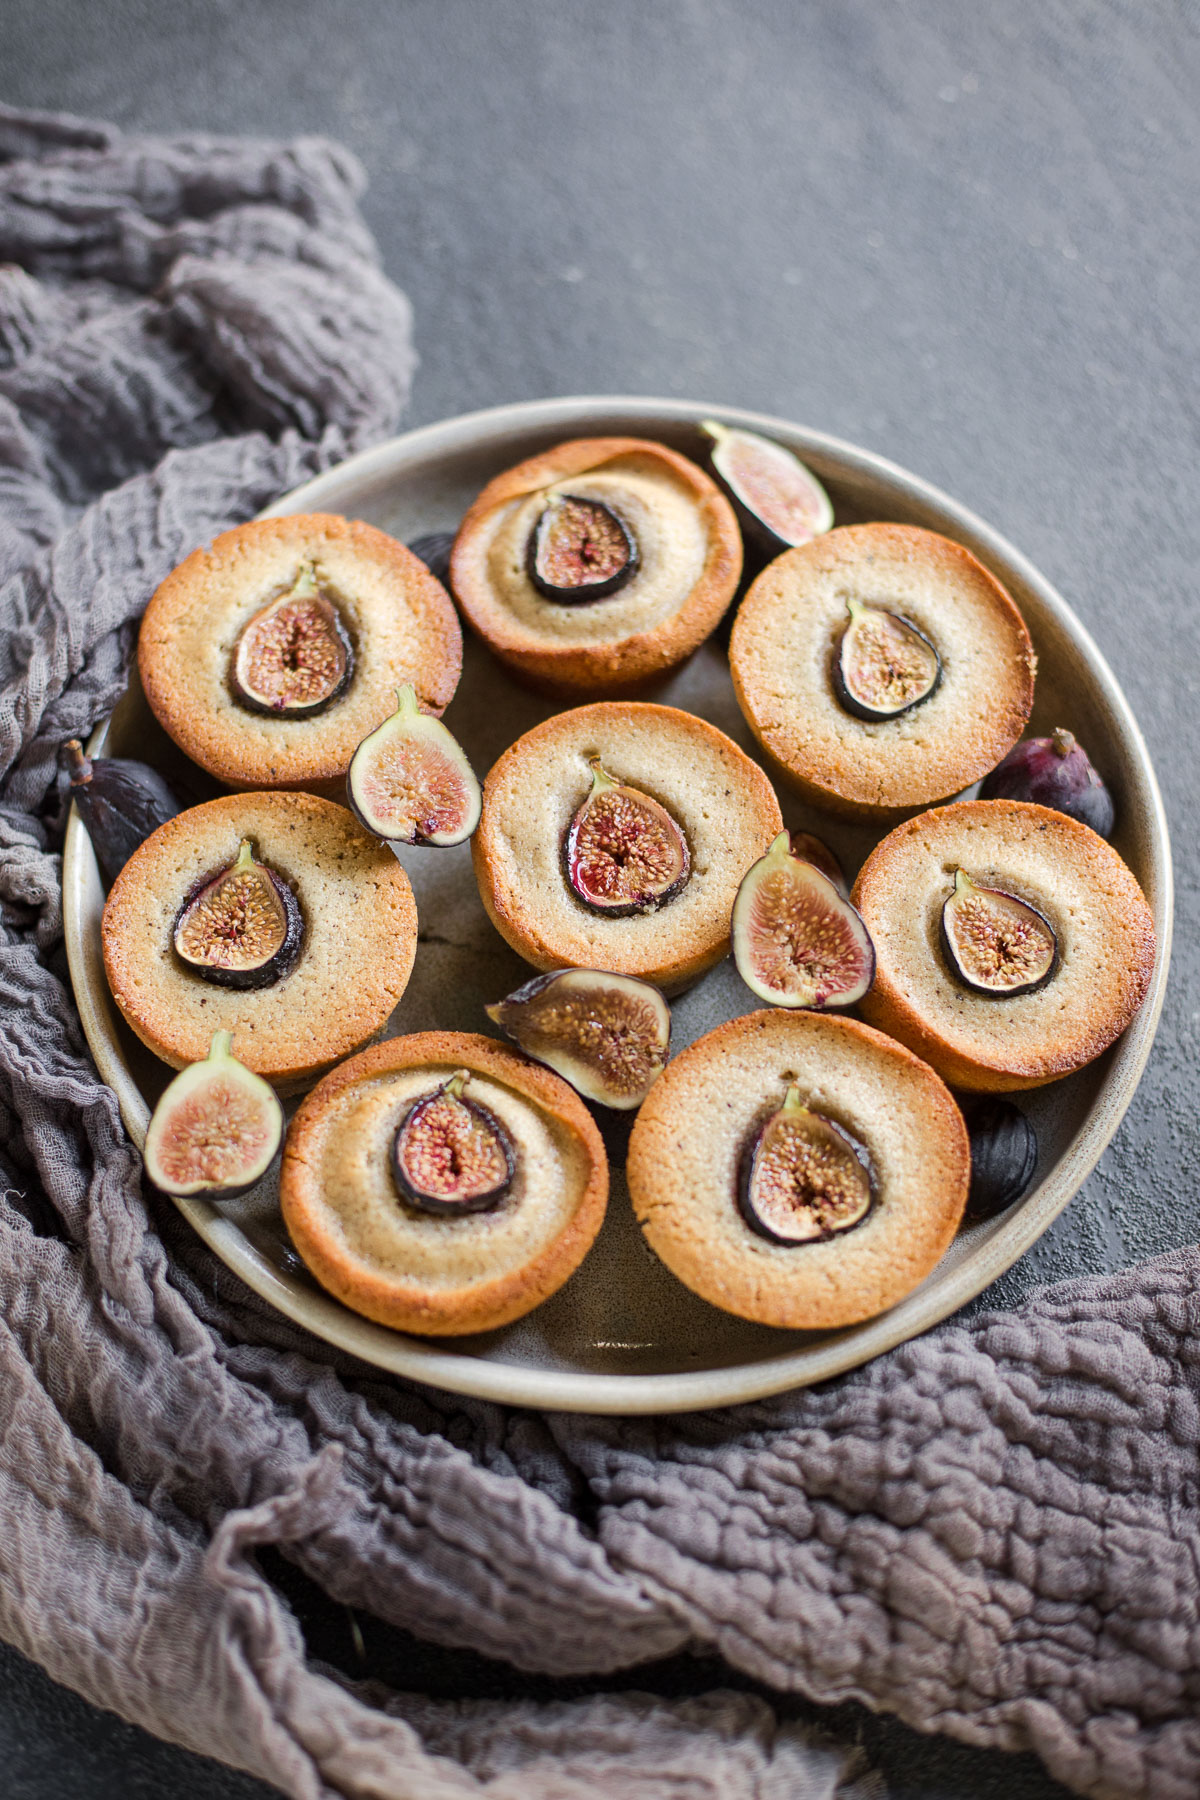 Gluten-free Financiers with Figs made with brown butter and almond flour (Grain free)